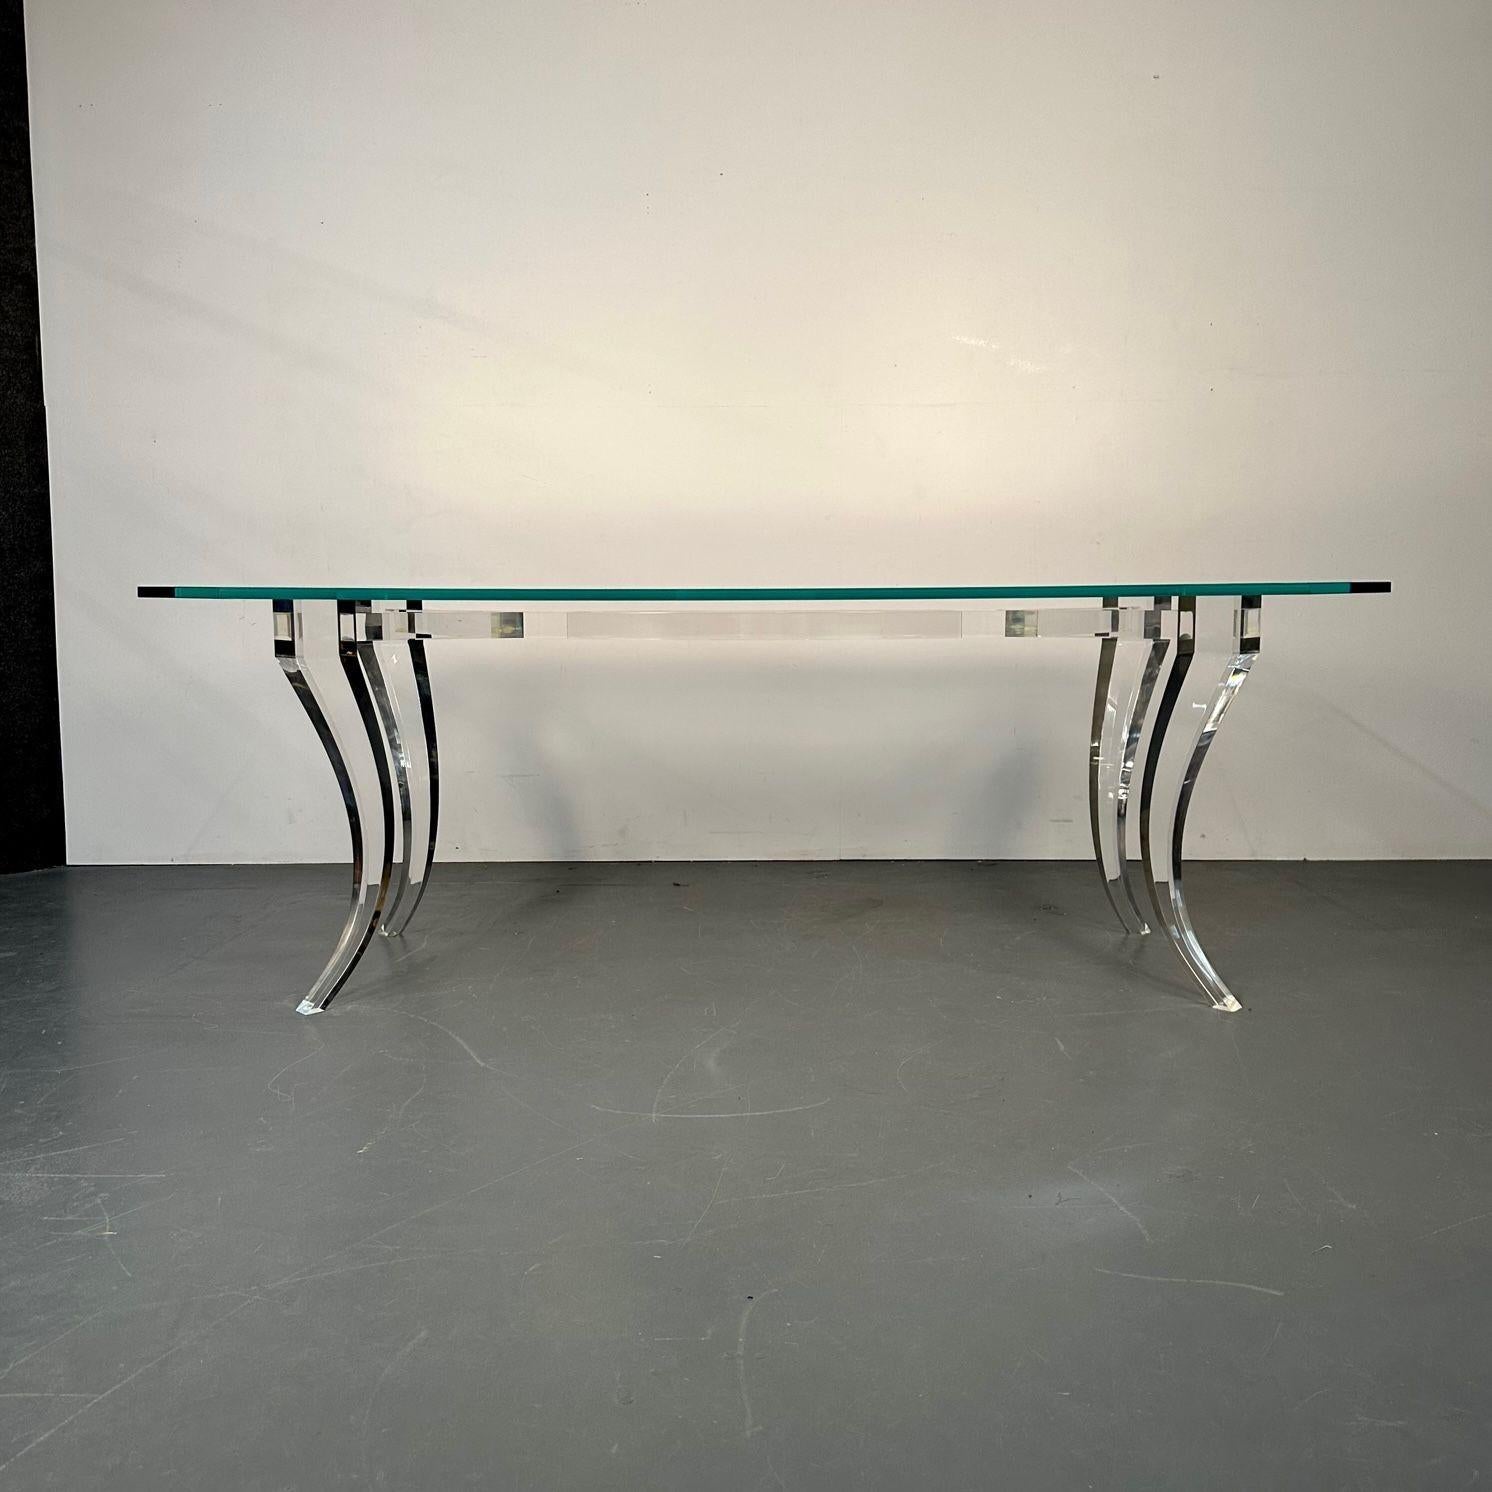 Modern Lucite and glass dining / kitchen table, center table, American Designer, 2000s
This strong and sturdy dining table is sleek and stylish having a thick Lucite base with curved legs leading to a bow top supporting a thick glass table top.